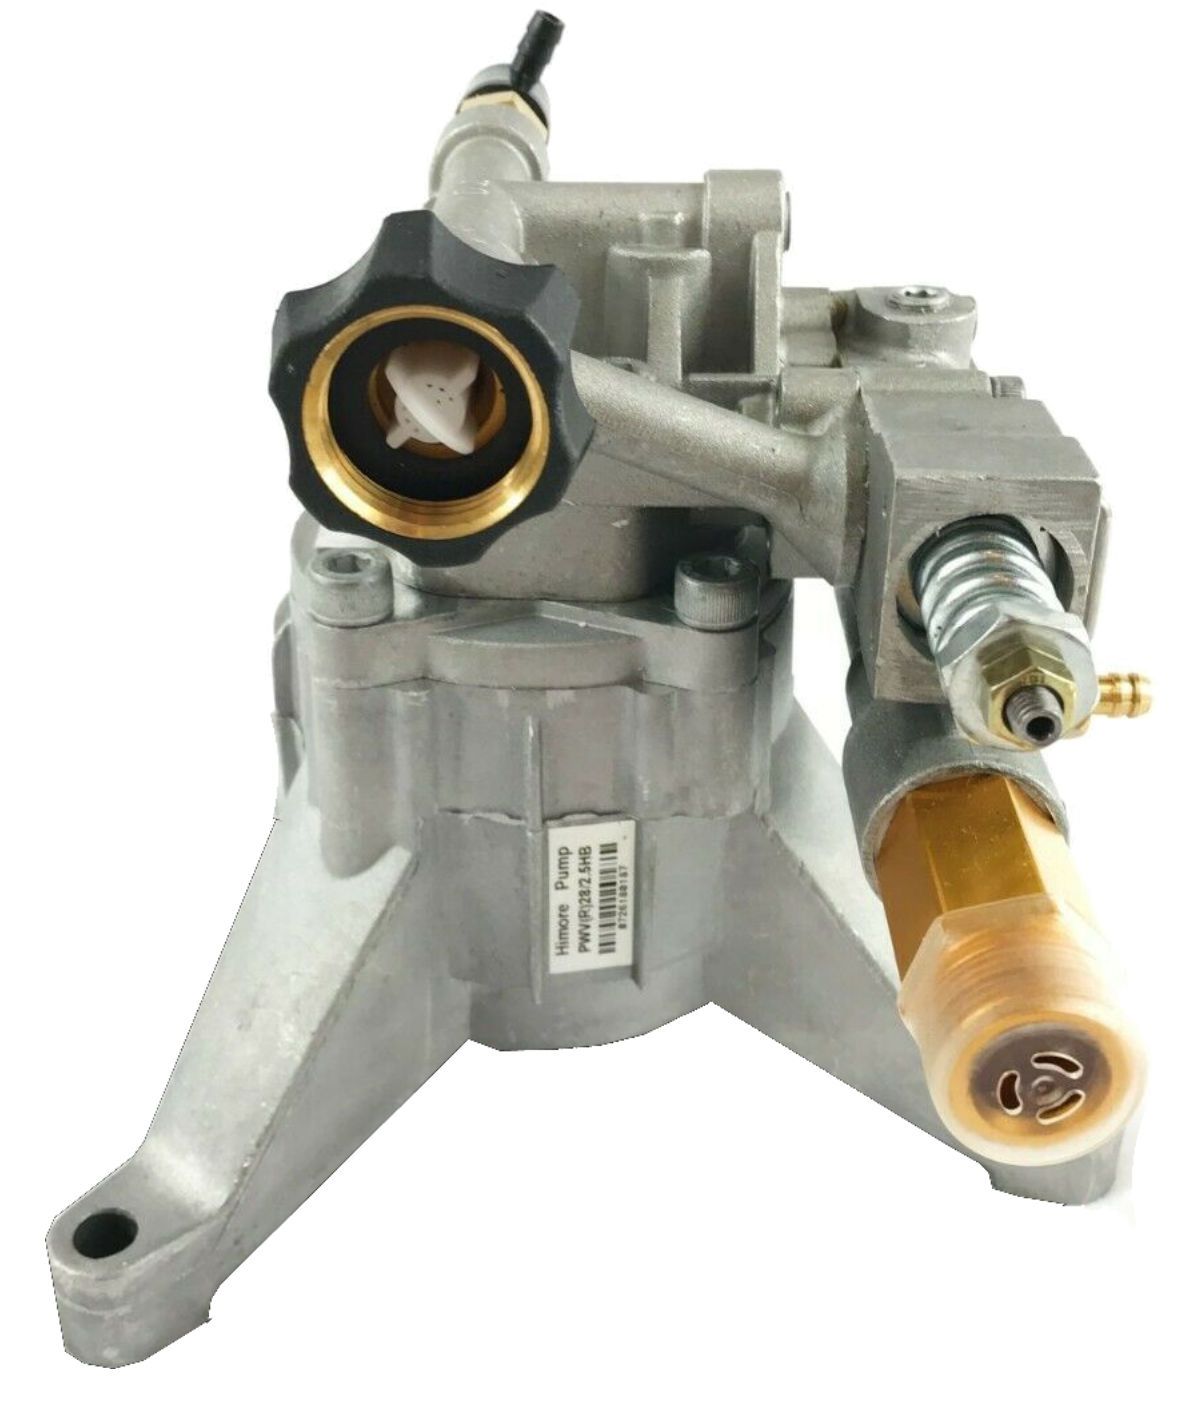 2700 PSI PRESSURE WASHER WATER PUMP Campbell Hausfeld PW165015LE - AE-Power